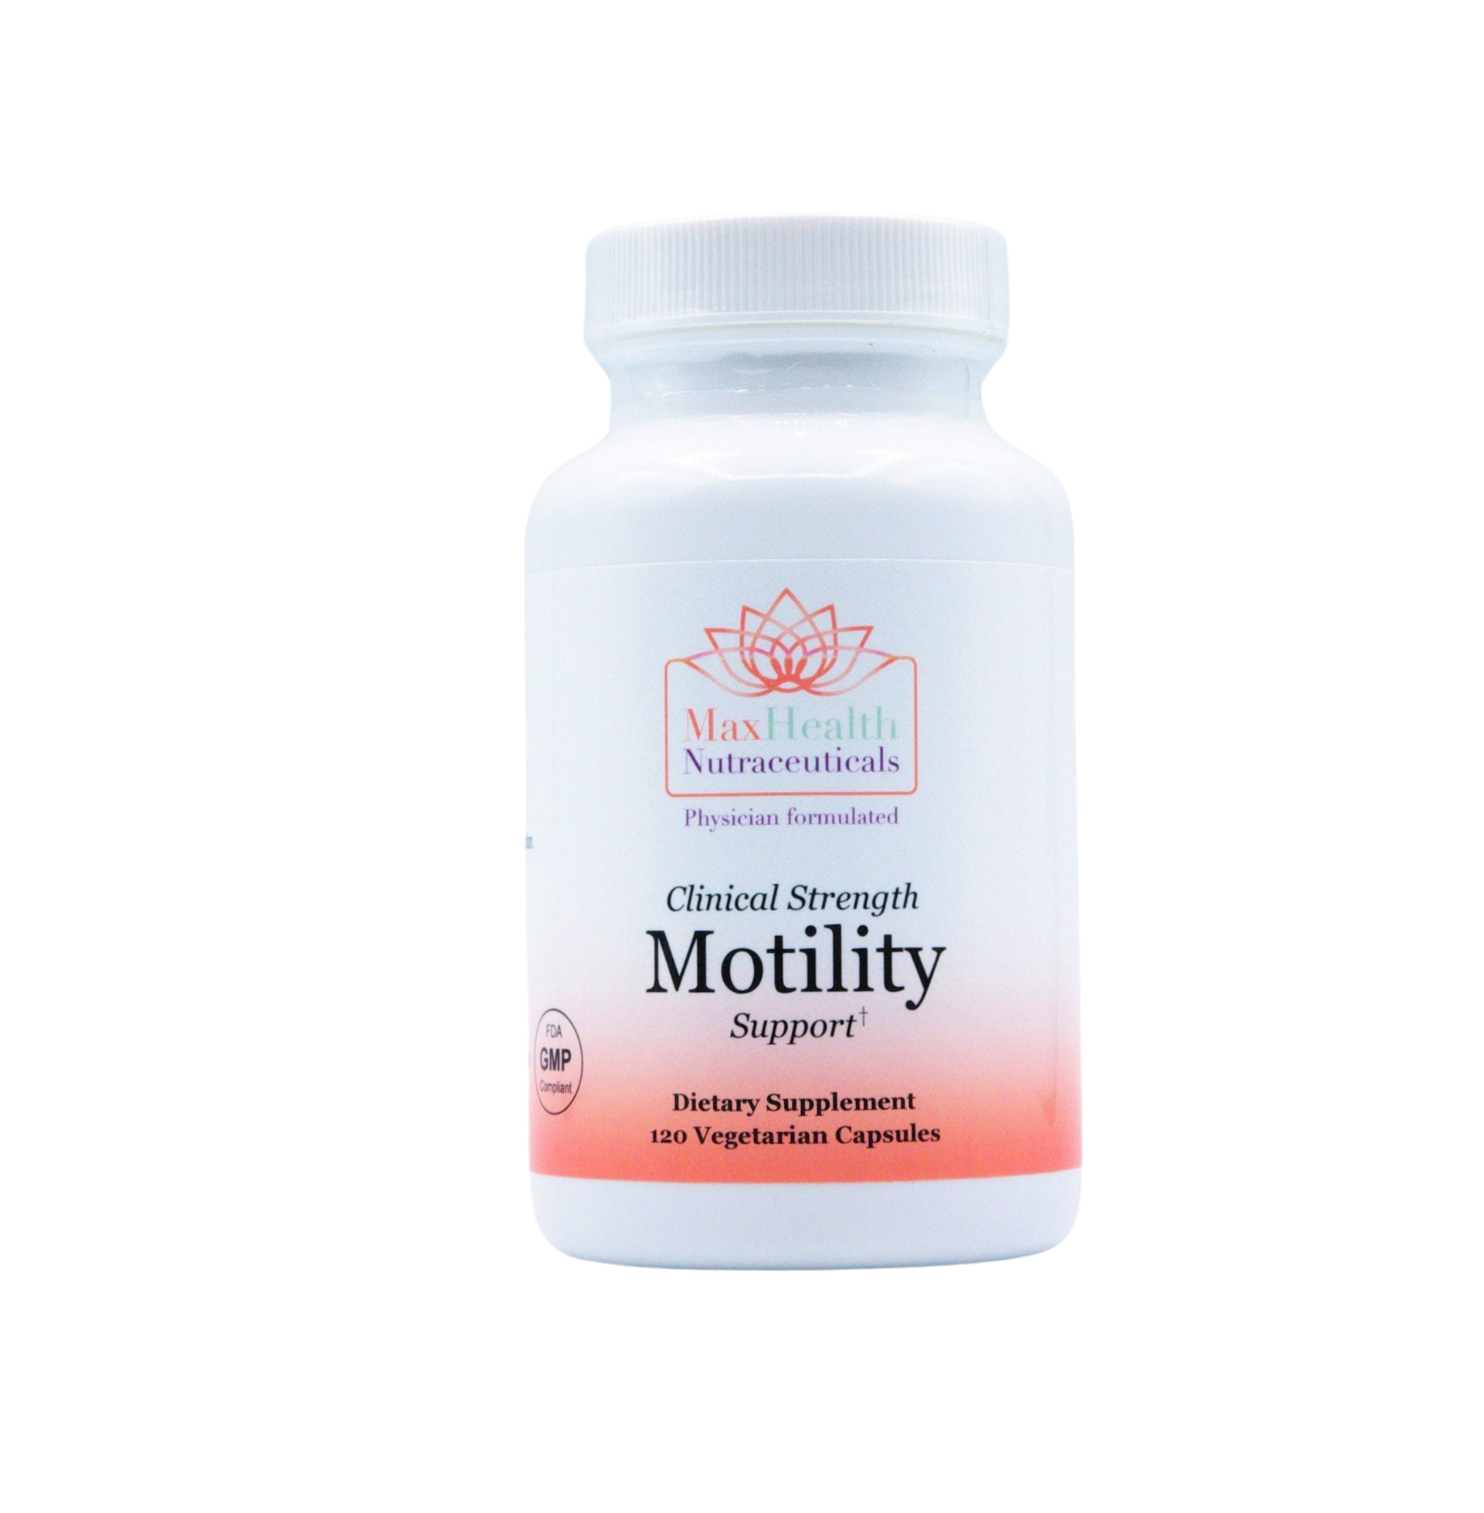 11Motility Support